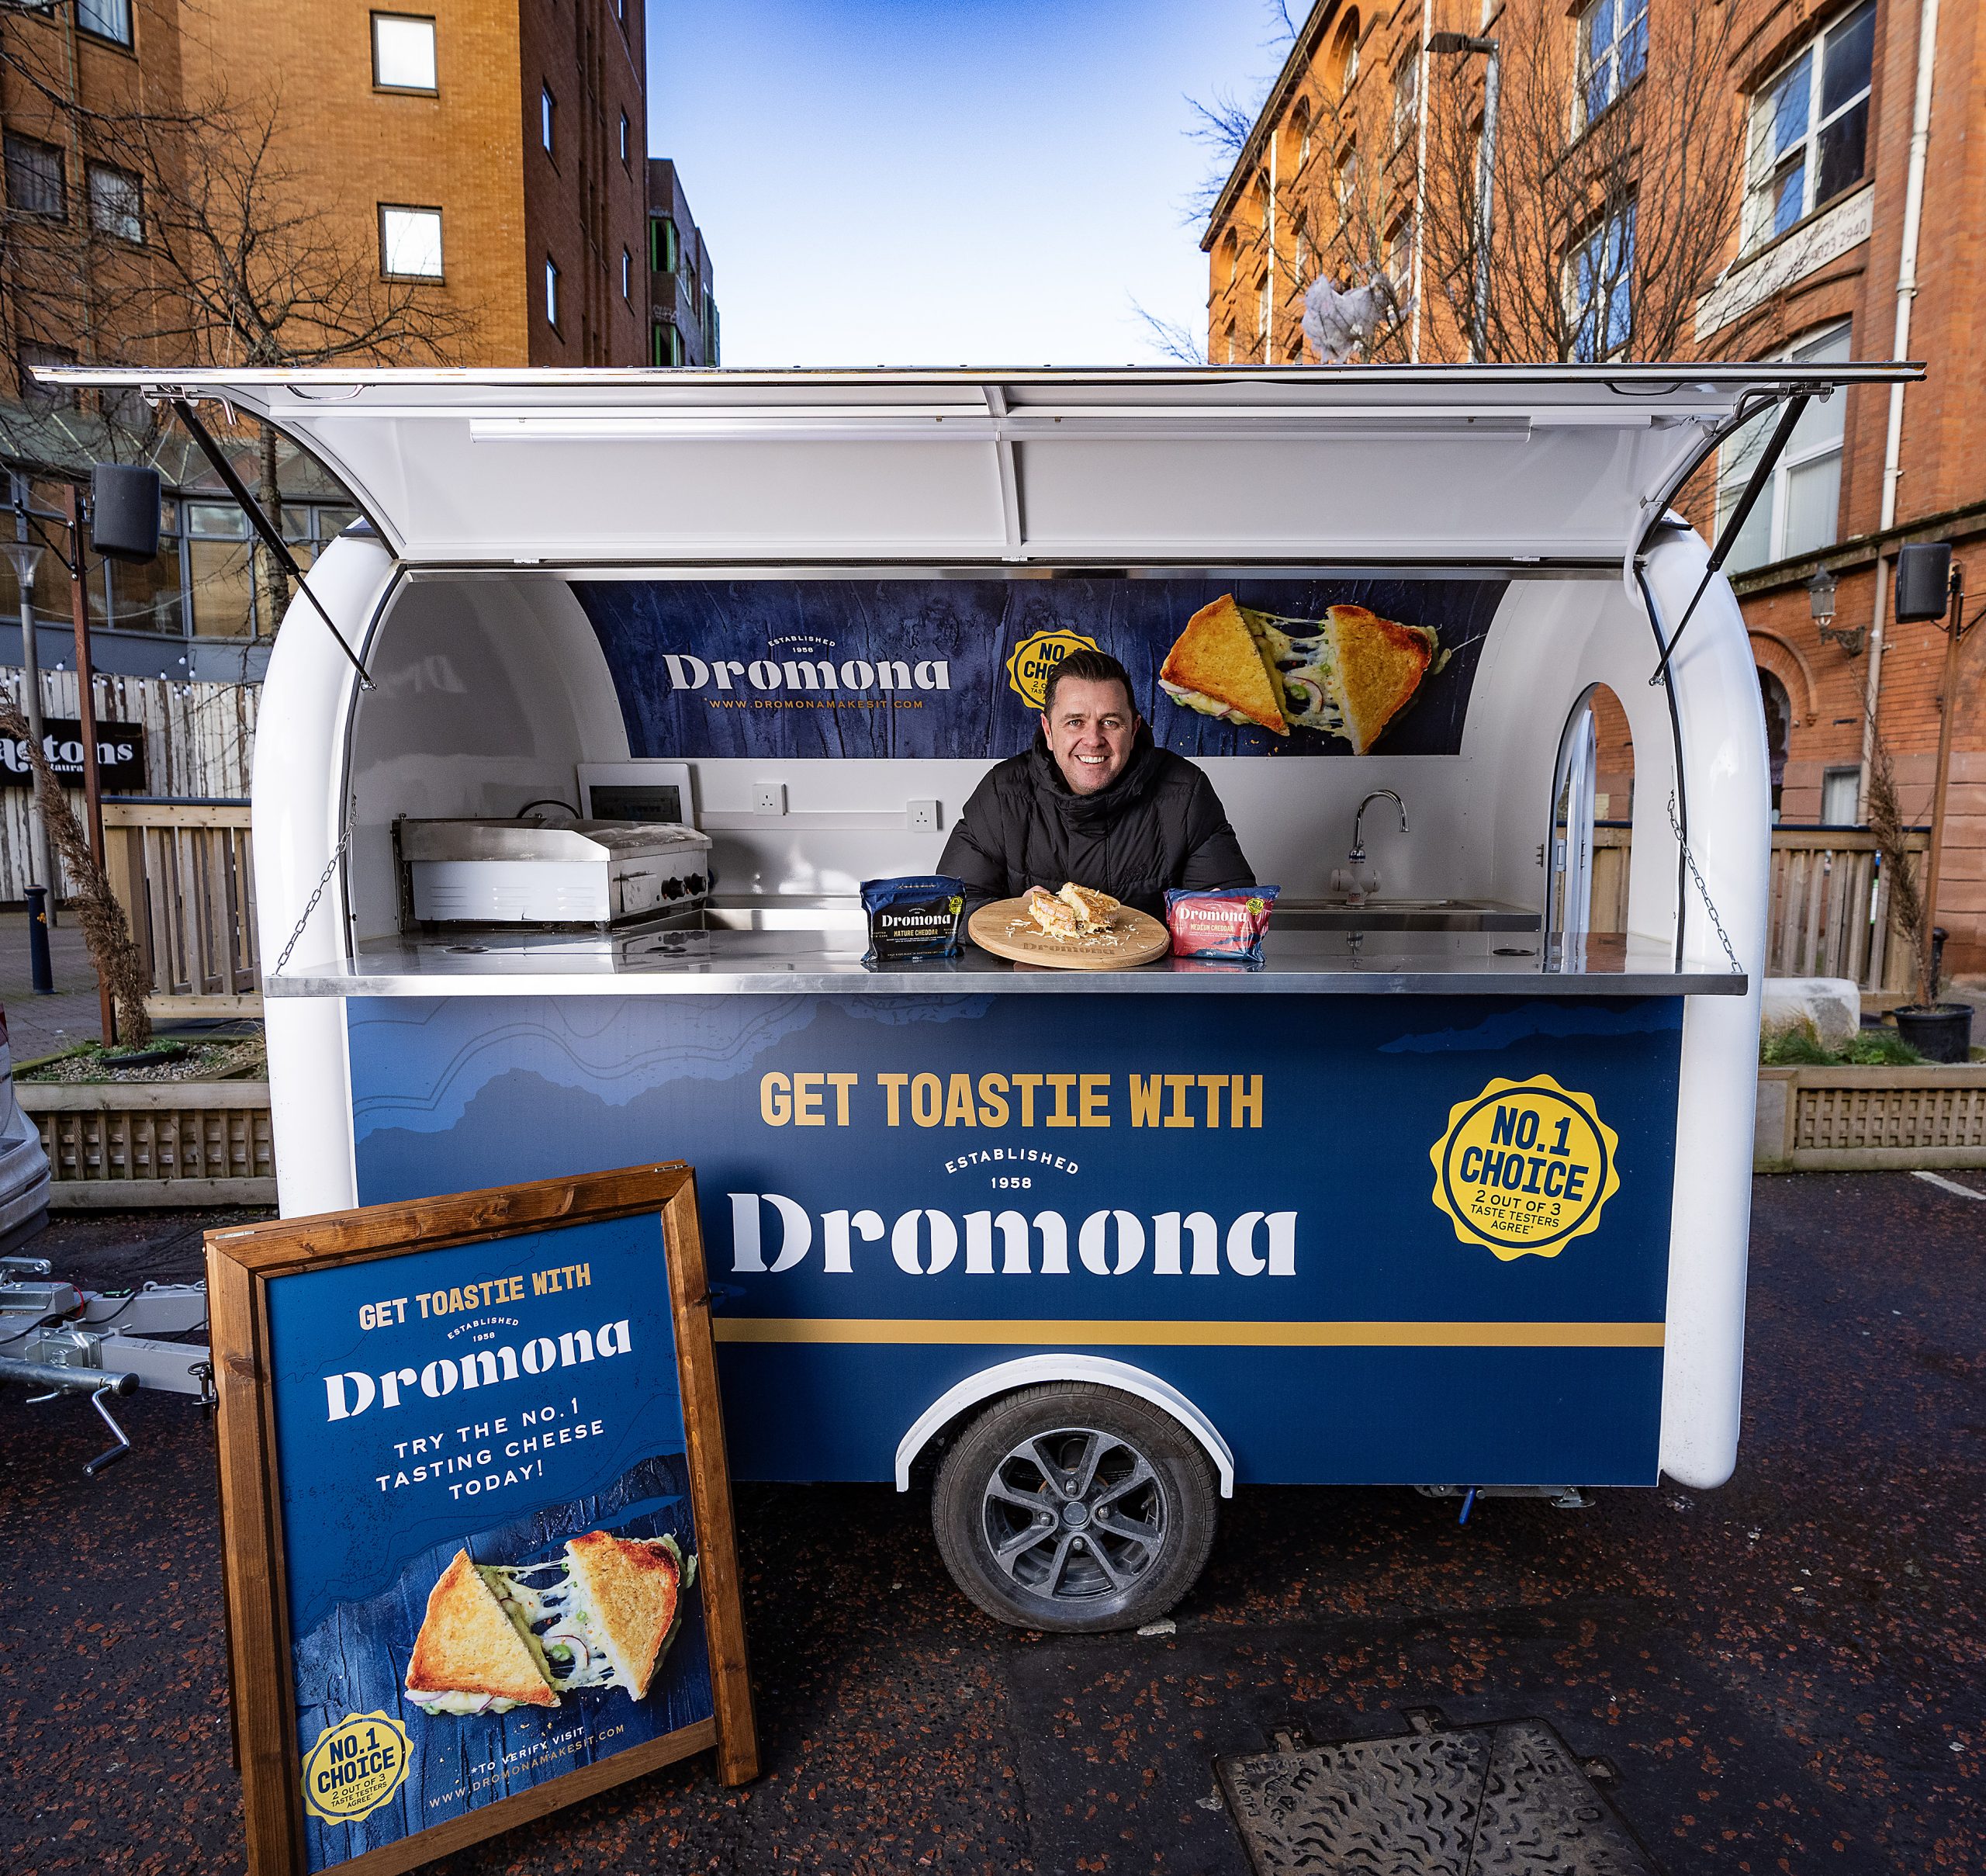 ‘Cheddar’ Days are coming thanks to Dromona